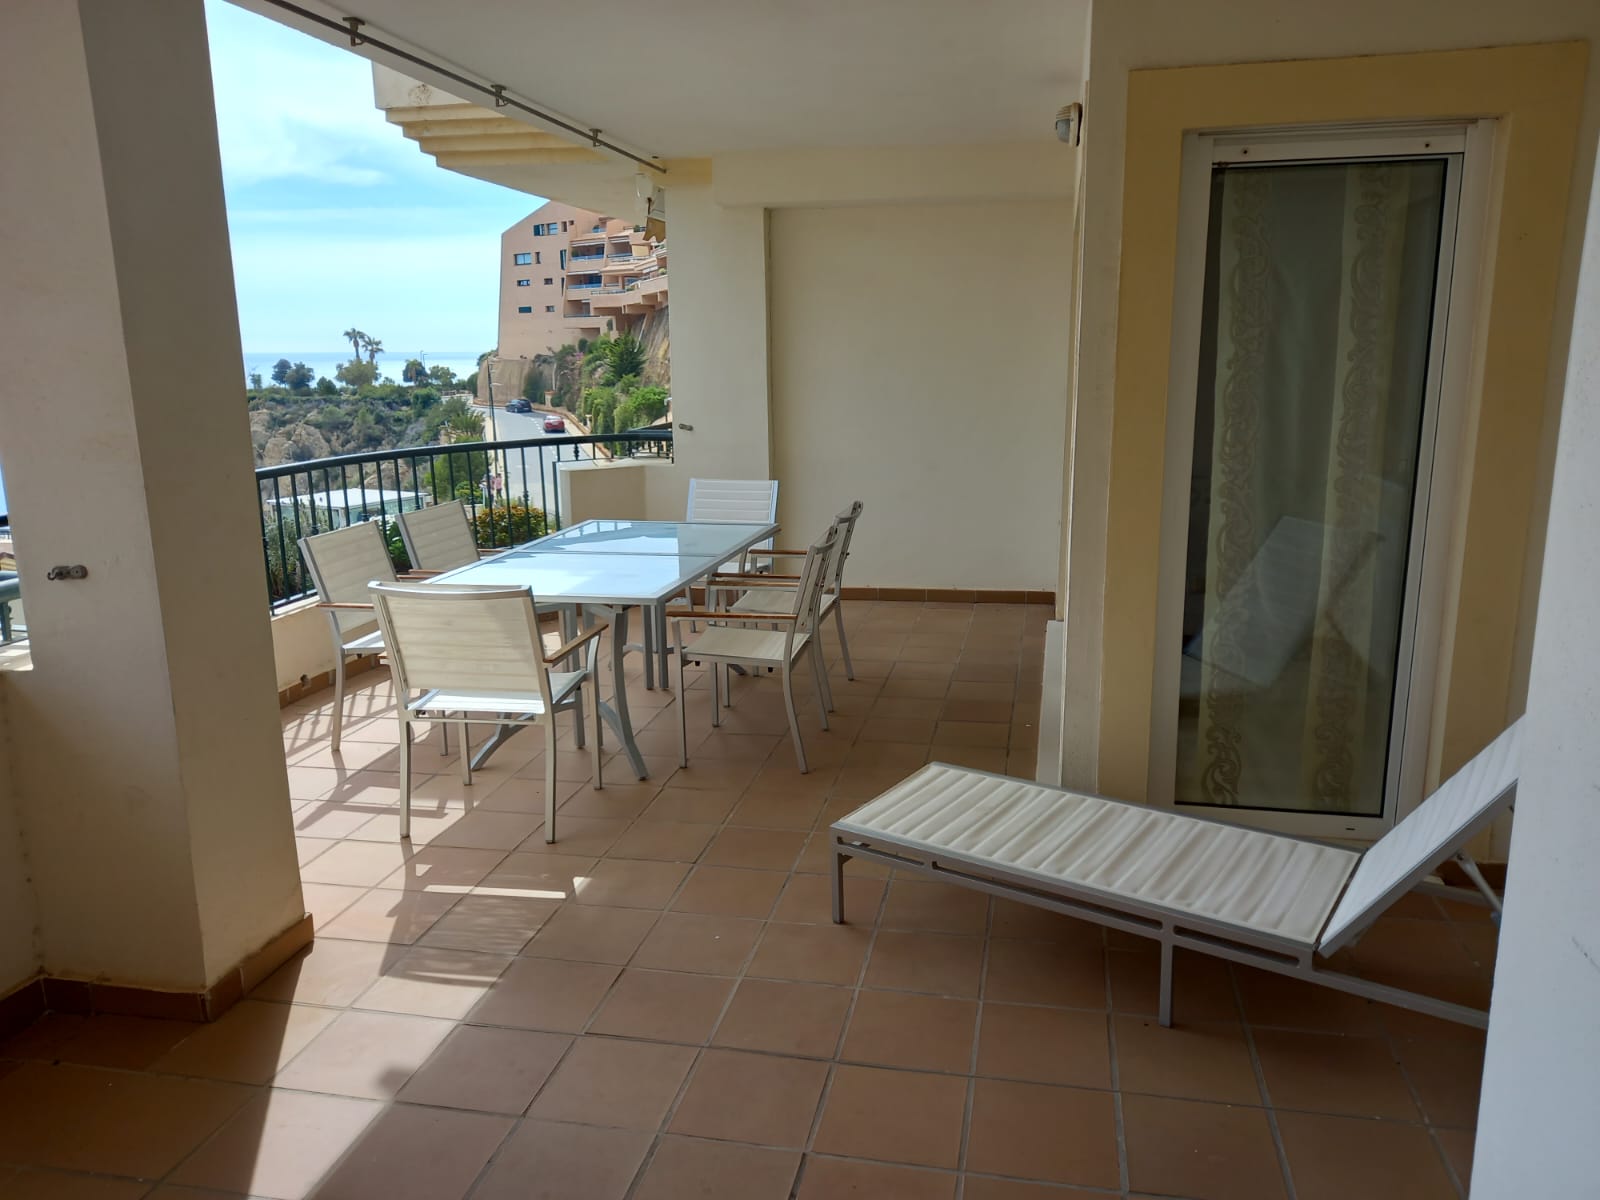 Apartment with spectacular views in Mascarat